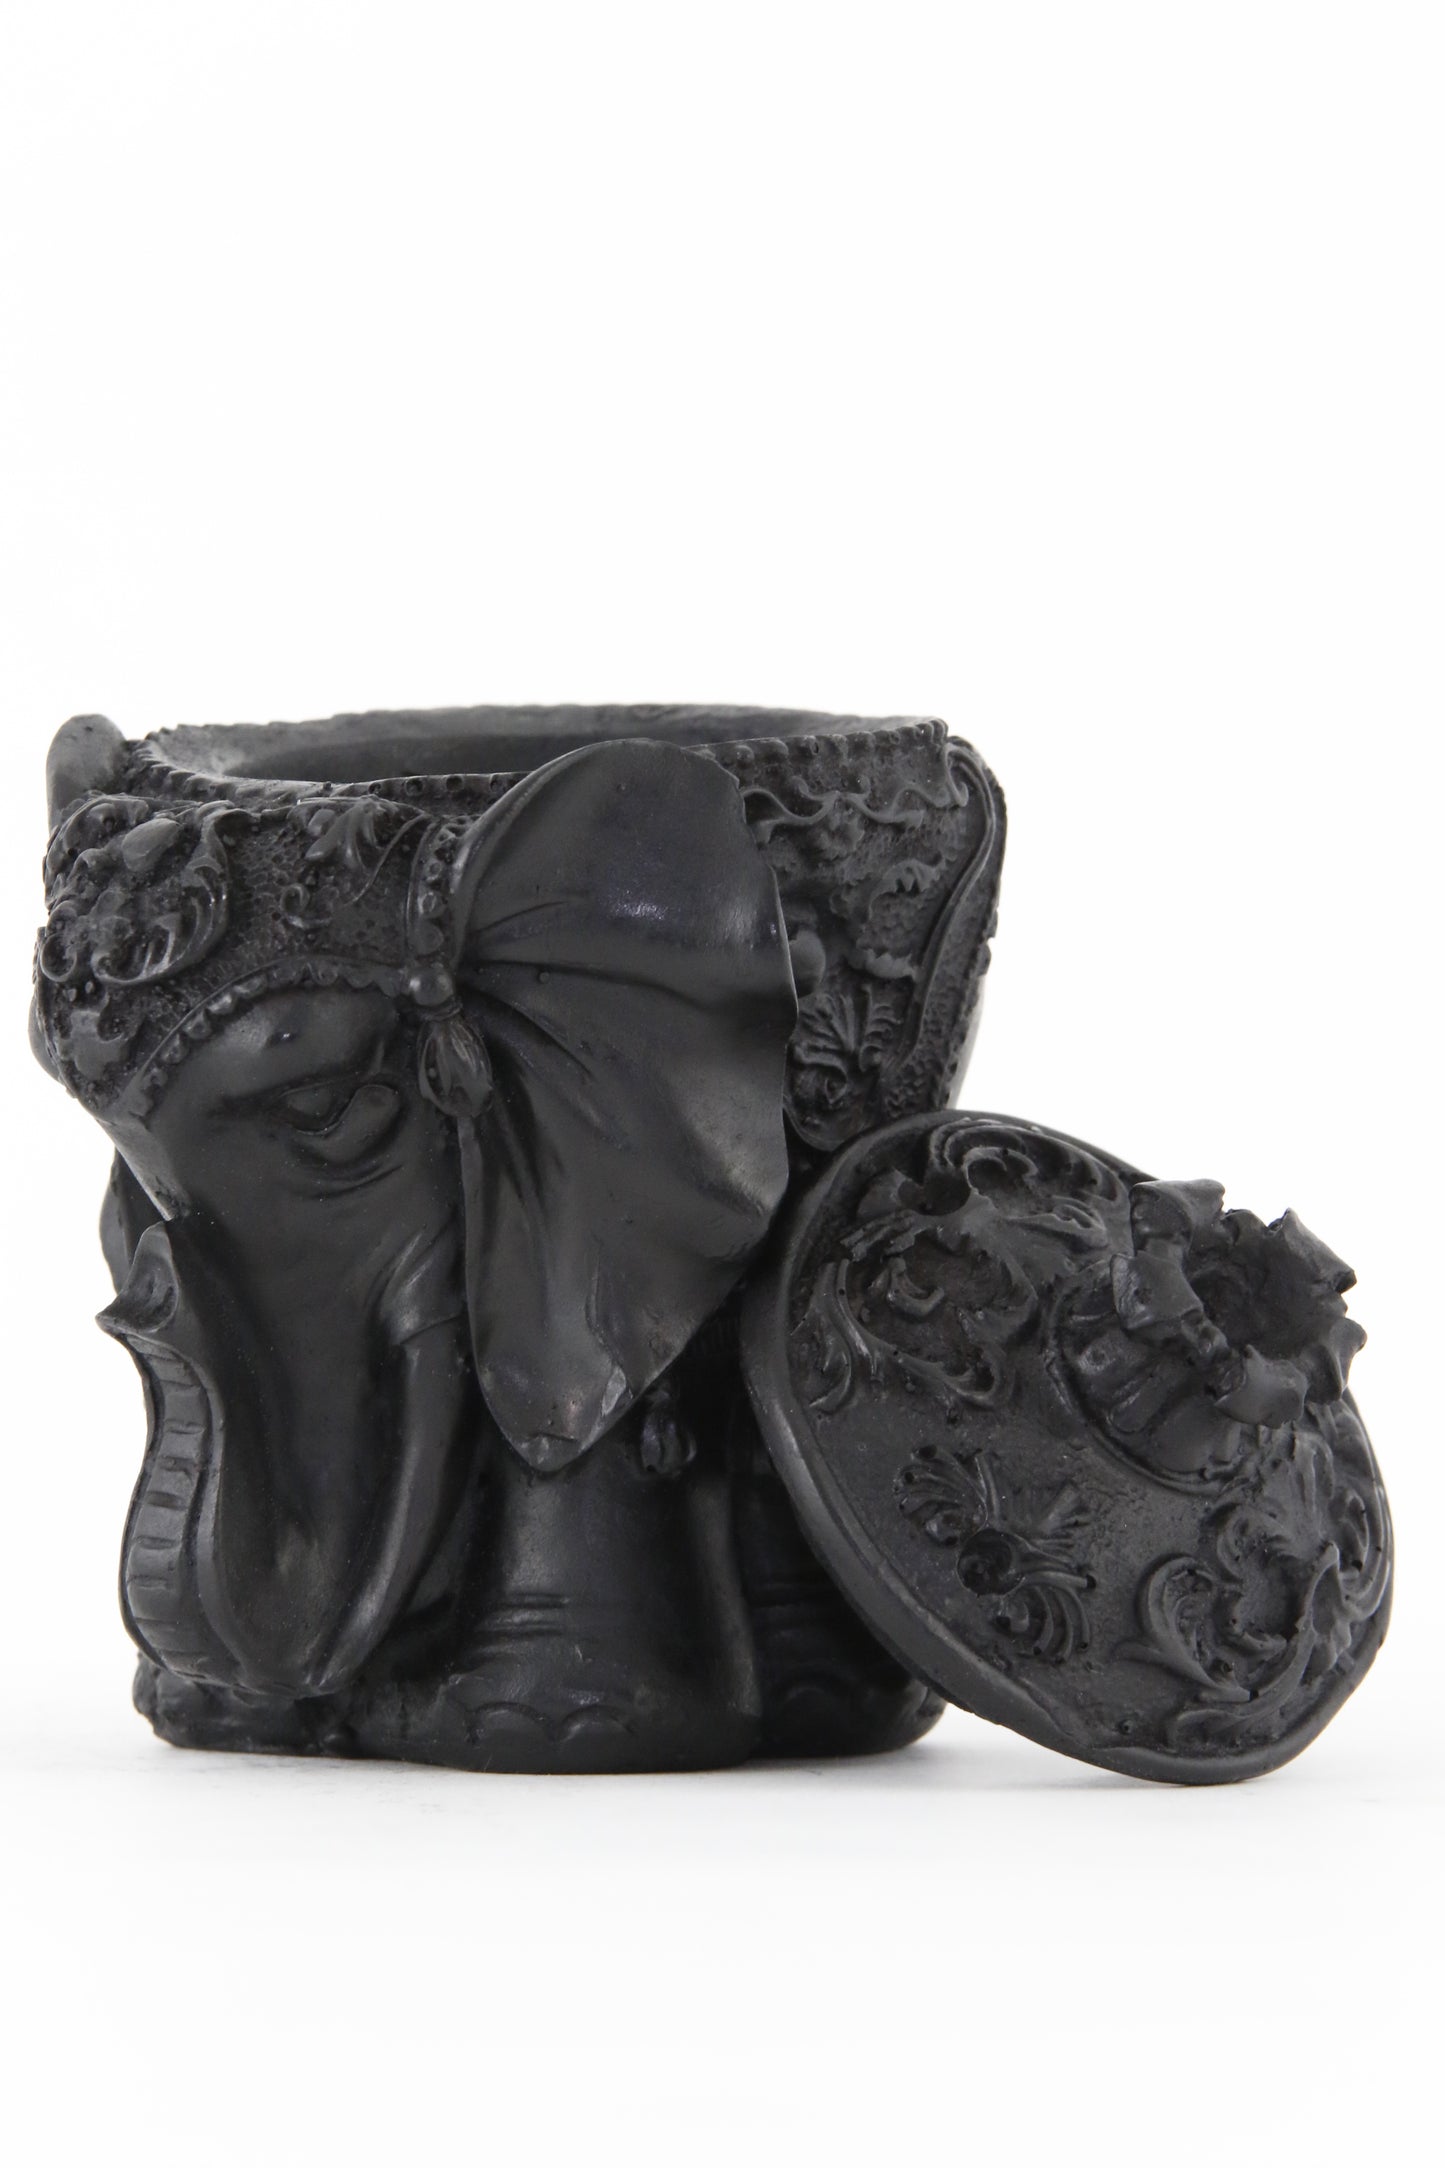 ELEPHANT BOX STATUE ROUND COVER OFF DARK SIDE VIEW